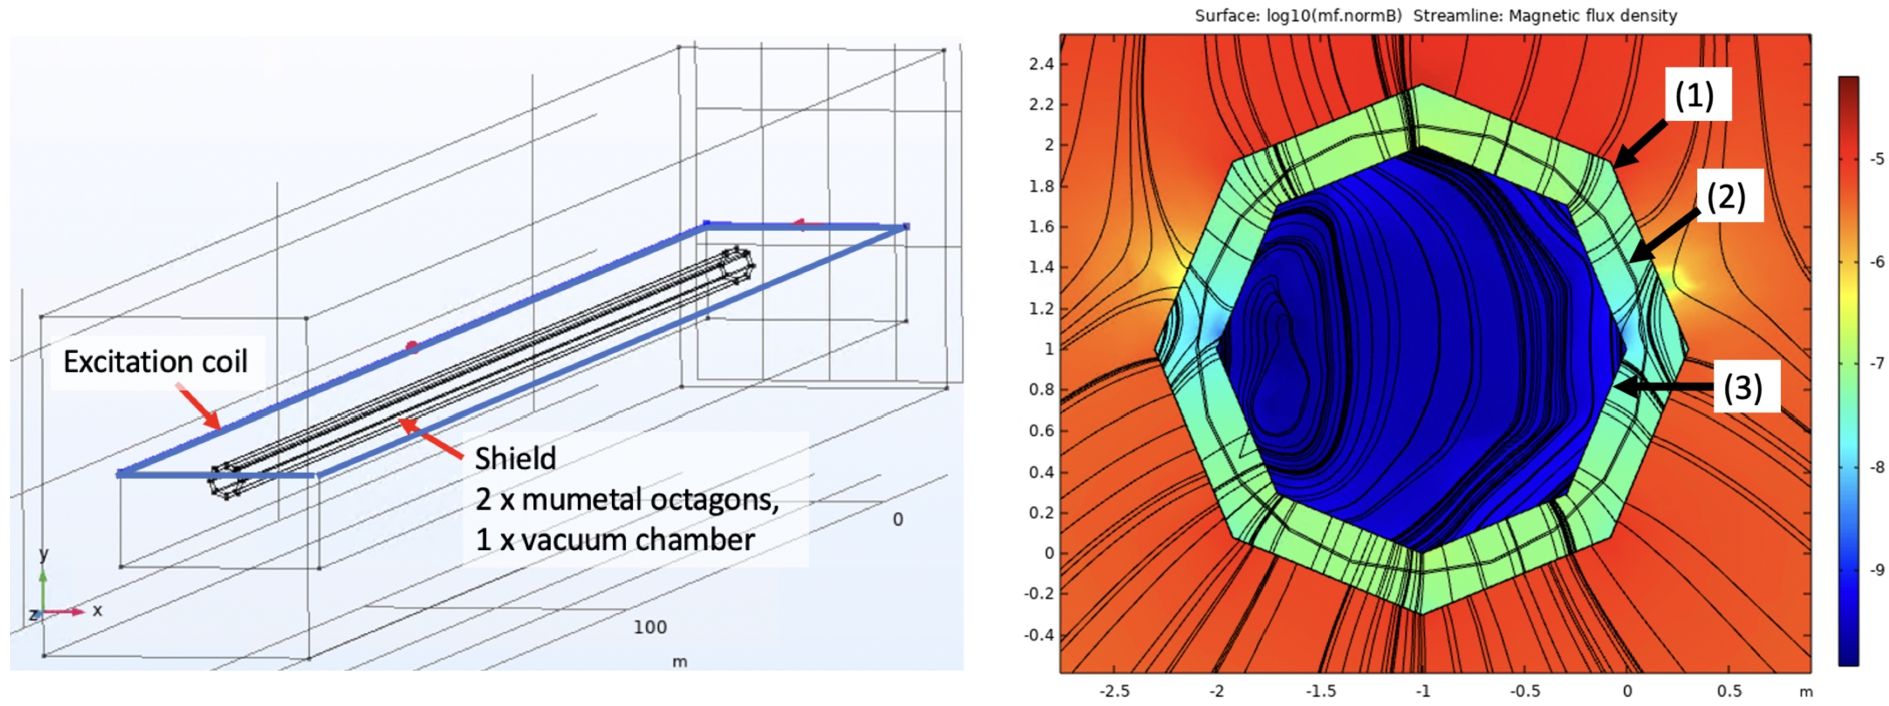 Left: the 200 m long and 2 m inside diameter arrangement. This consists of a pair of octagons made from mumetal, with a 200 m length and a stainless-steel vacuum chamber separating them. Right: a shield cross section. A logarithmic scale magnetic field magnitude is shown. (1) outer mumetal shield; (2) vacuum chamber; (3) inner mumetal shield.